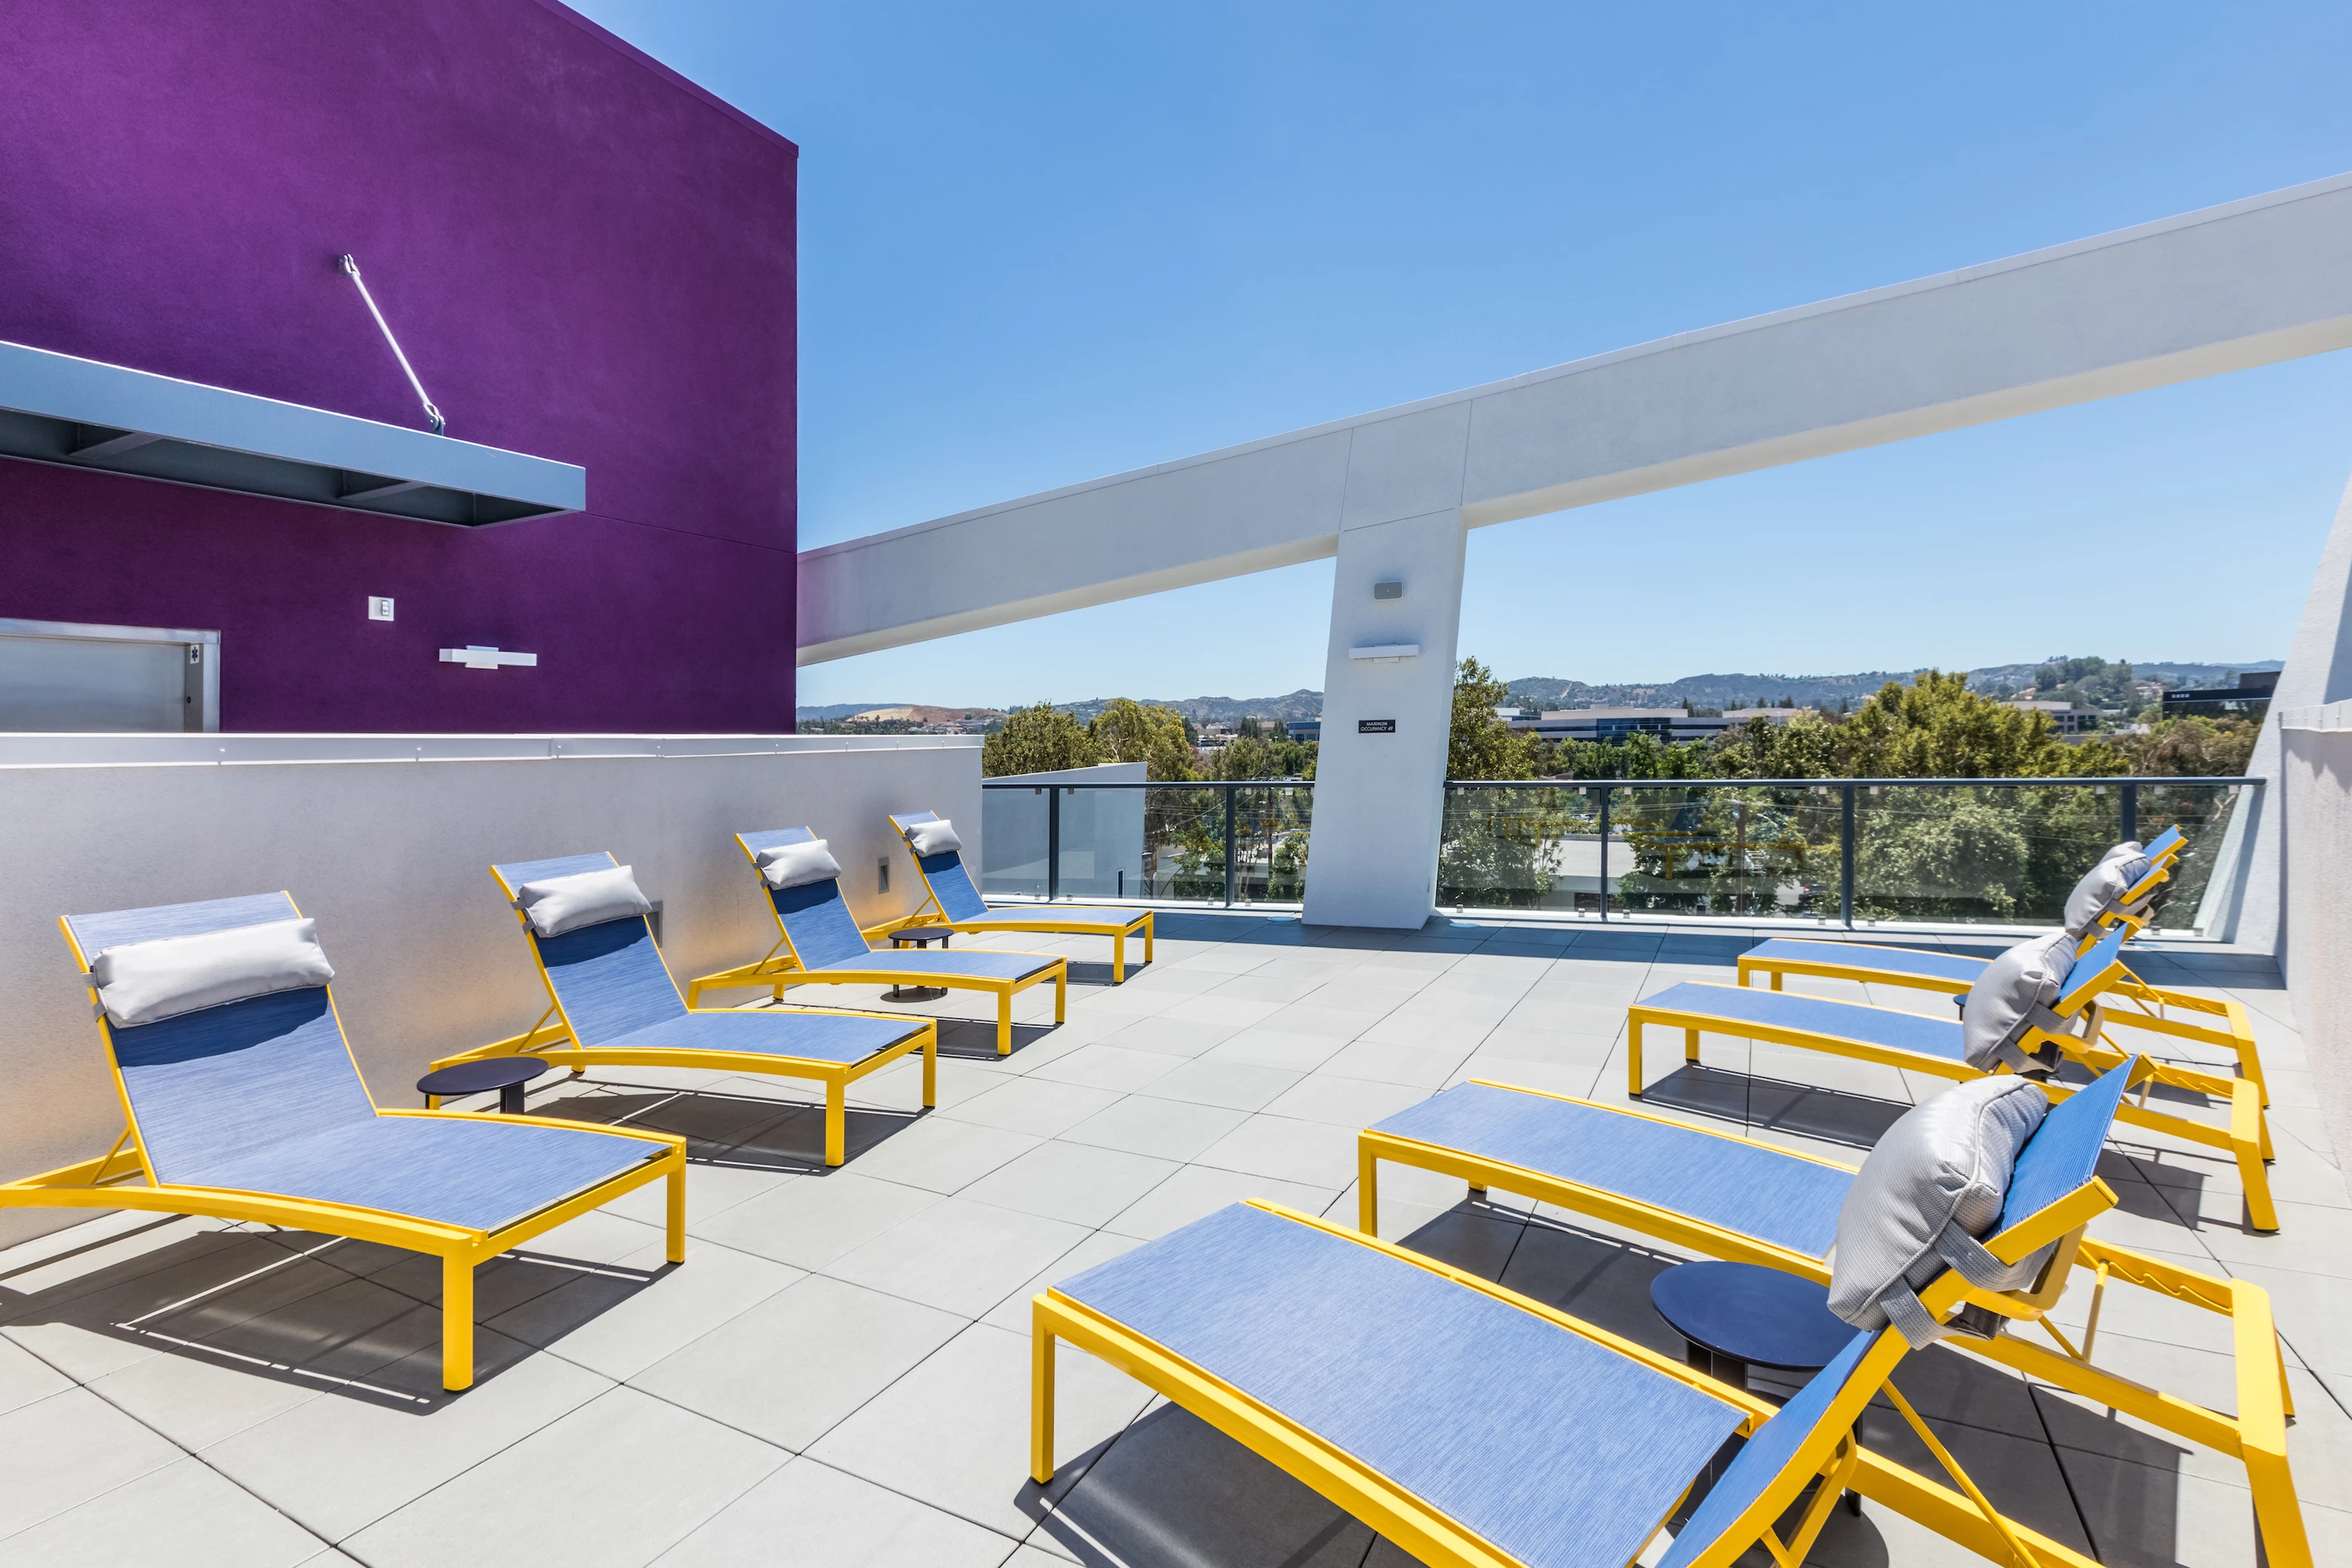 1241-9-amenity-tower-rooftop-lounge-sun-deck-at-vela-on-ox-apartments-in-woodland-hil.jpg